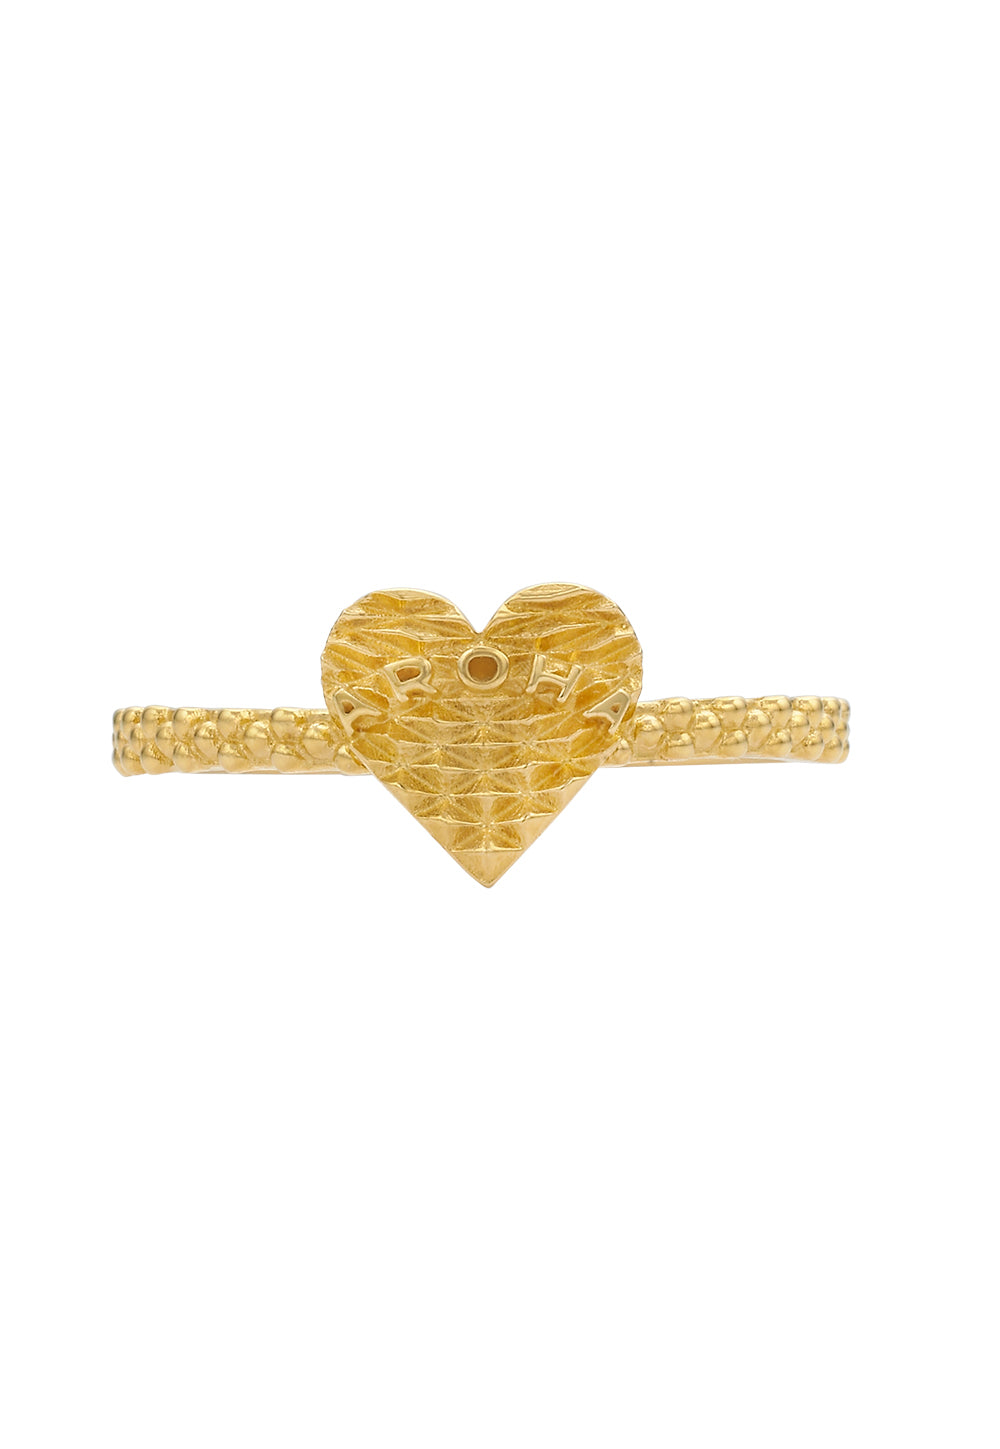 Aroha Heart Stacker Ring sold by Angel Divine